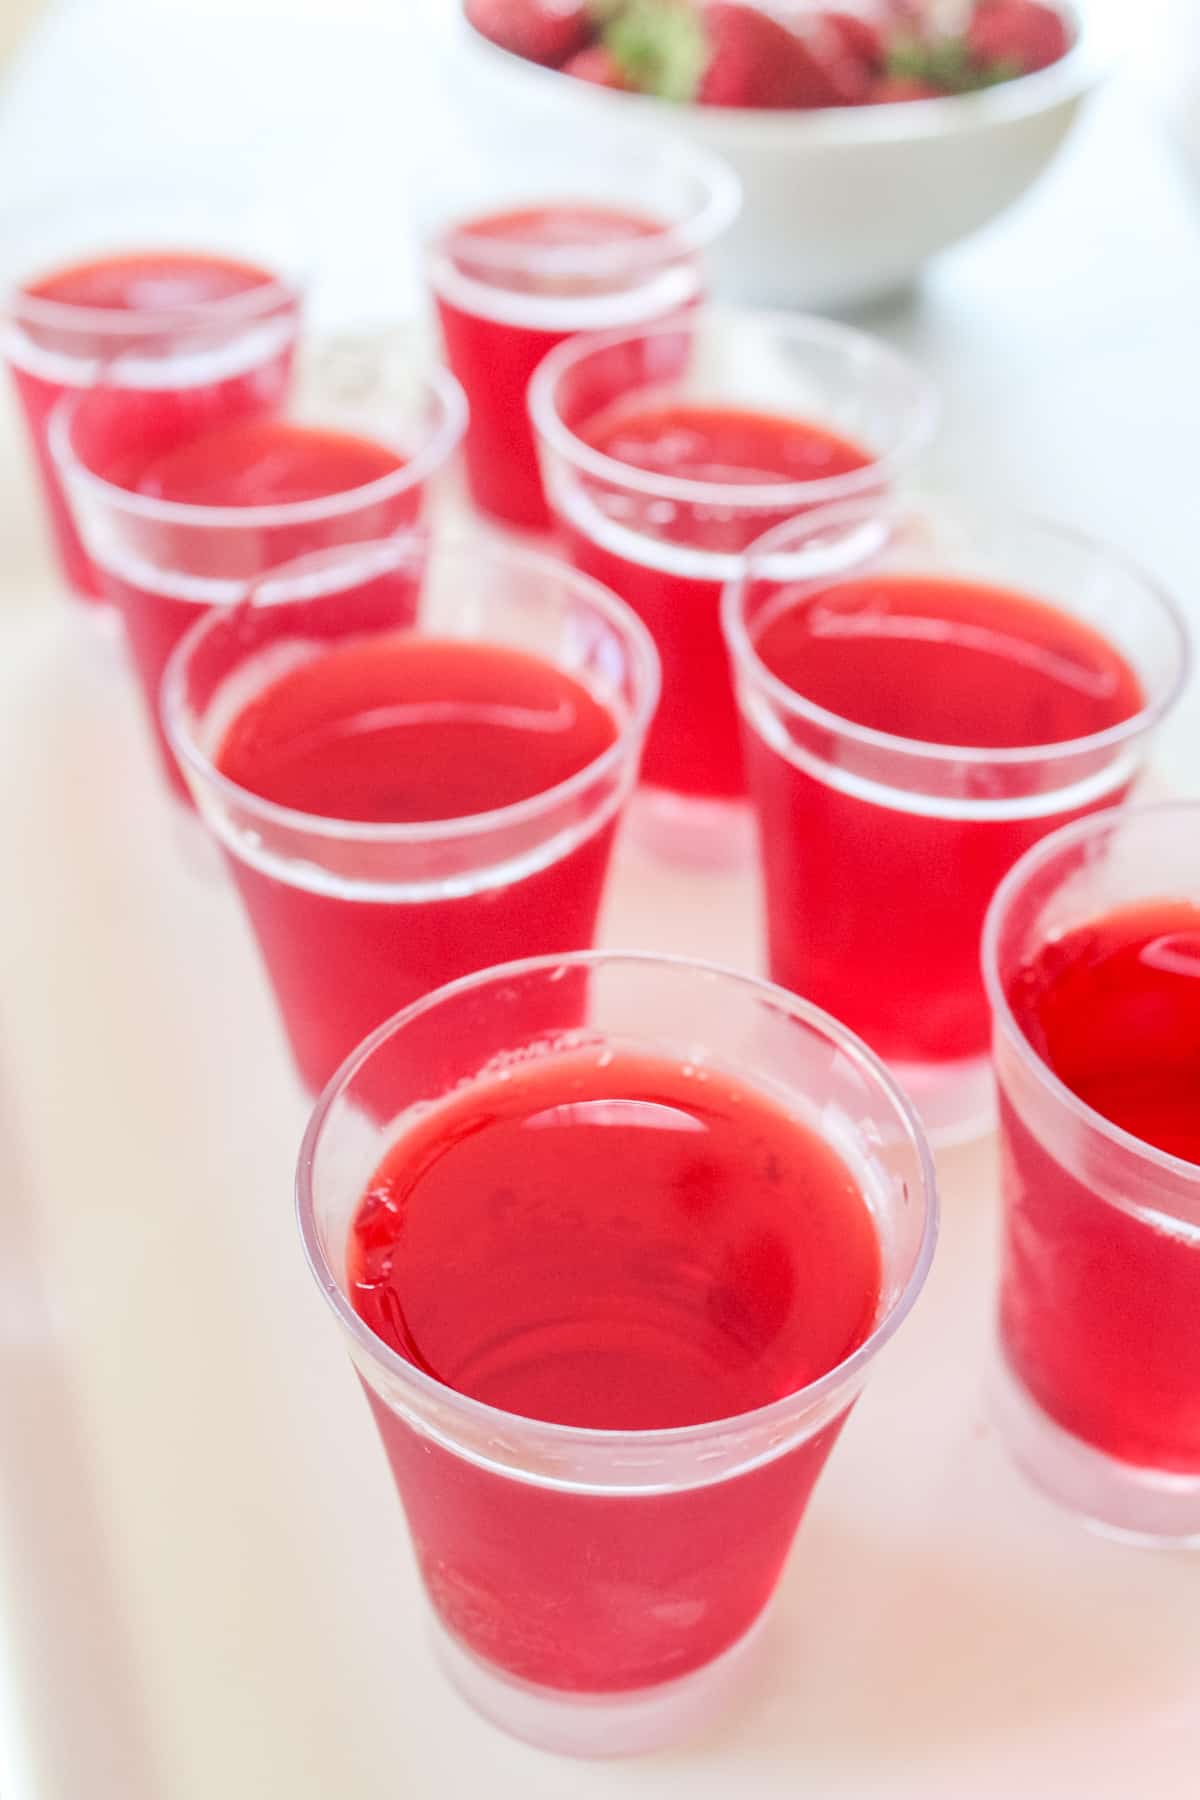 pour red jello mixture into shot cups